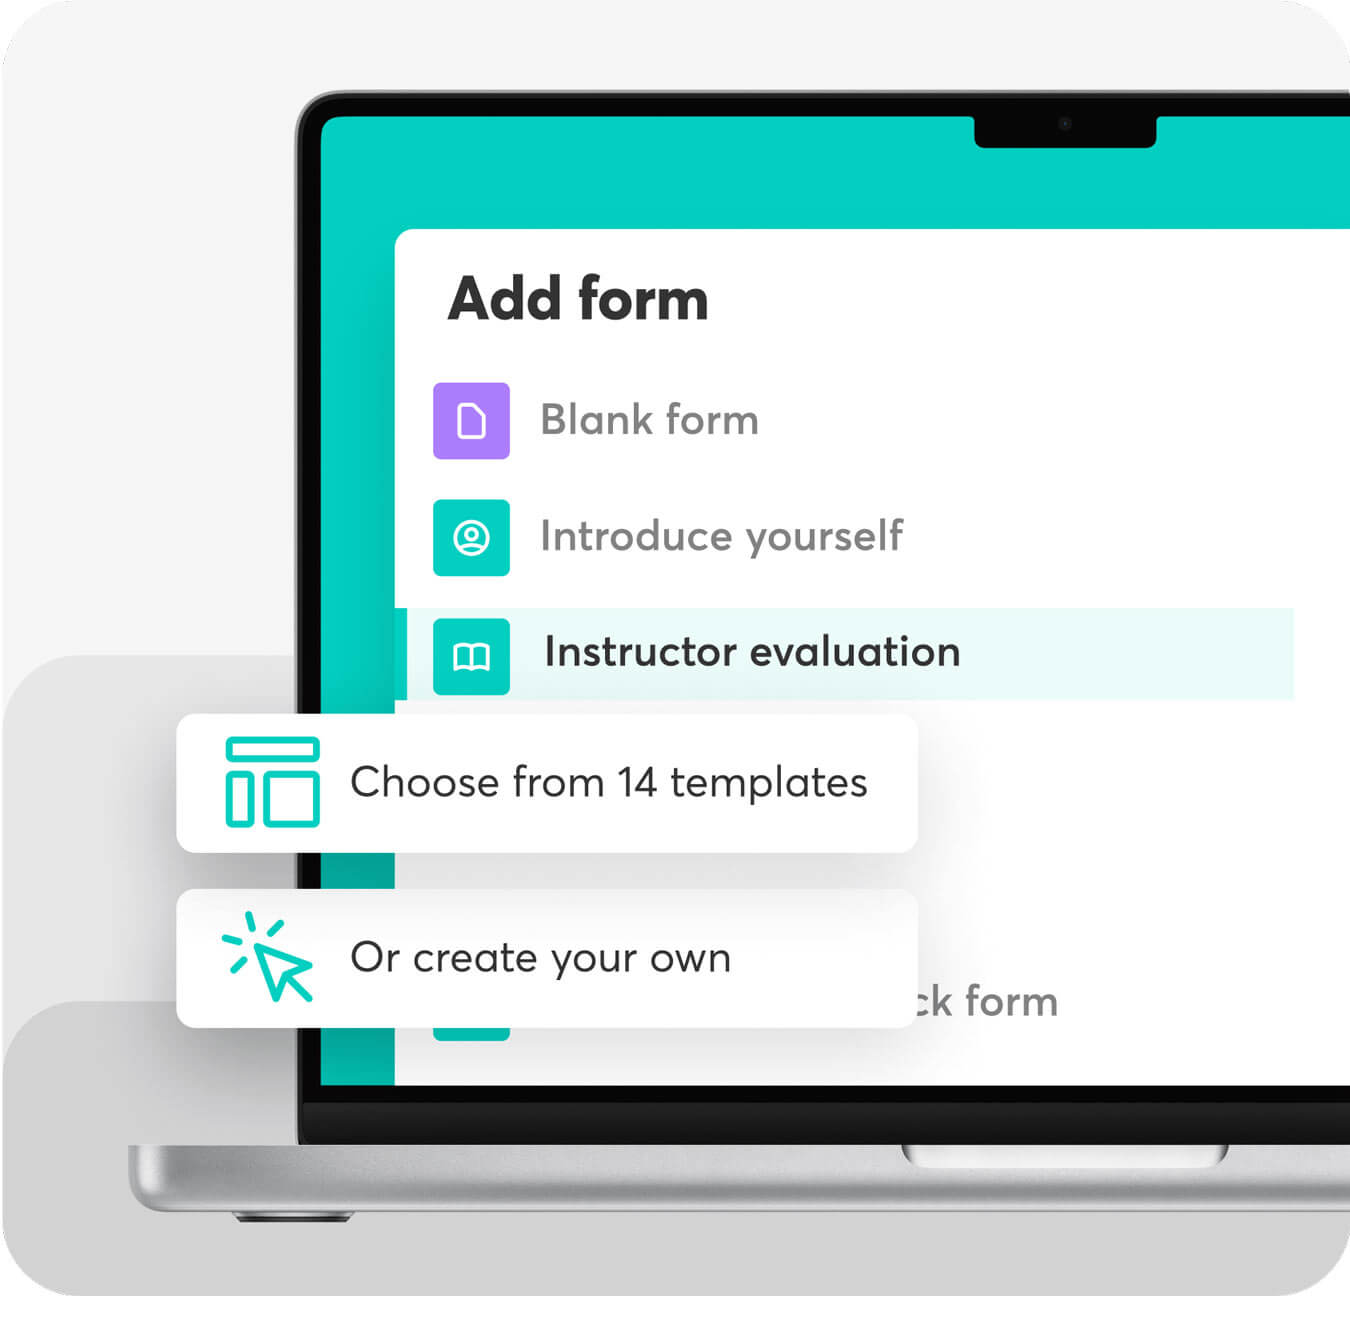 Choose from 14 templates to create your own form and survey or start from stratch.